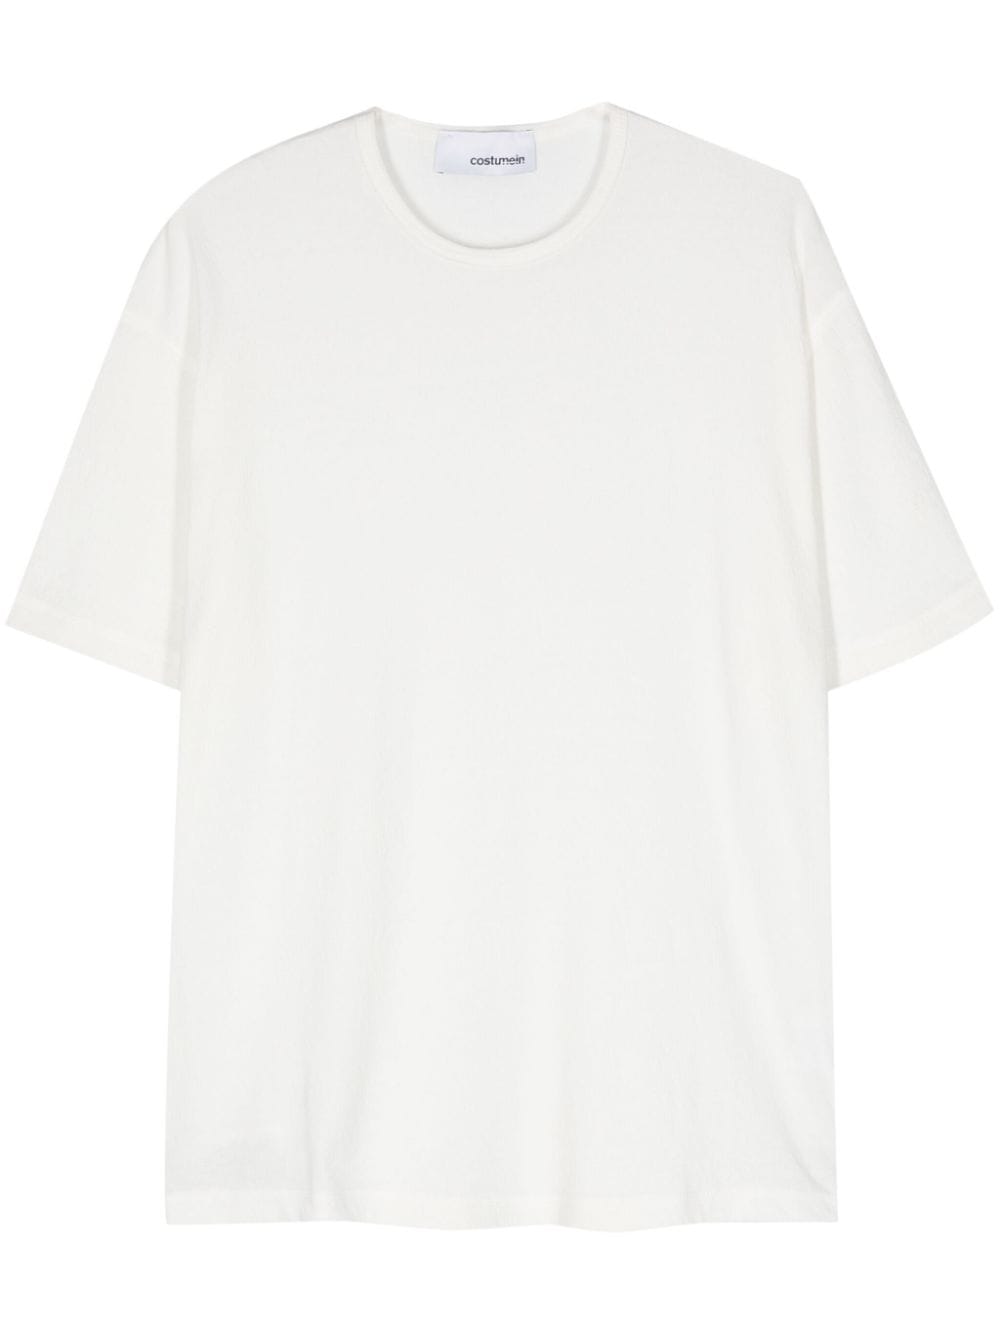 Costumein Crepe Cotton T-shirt In White